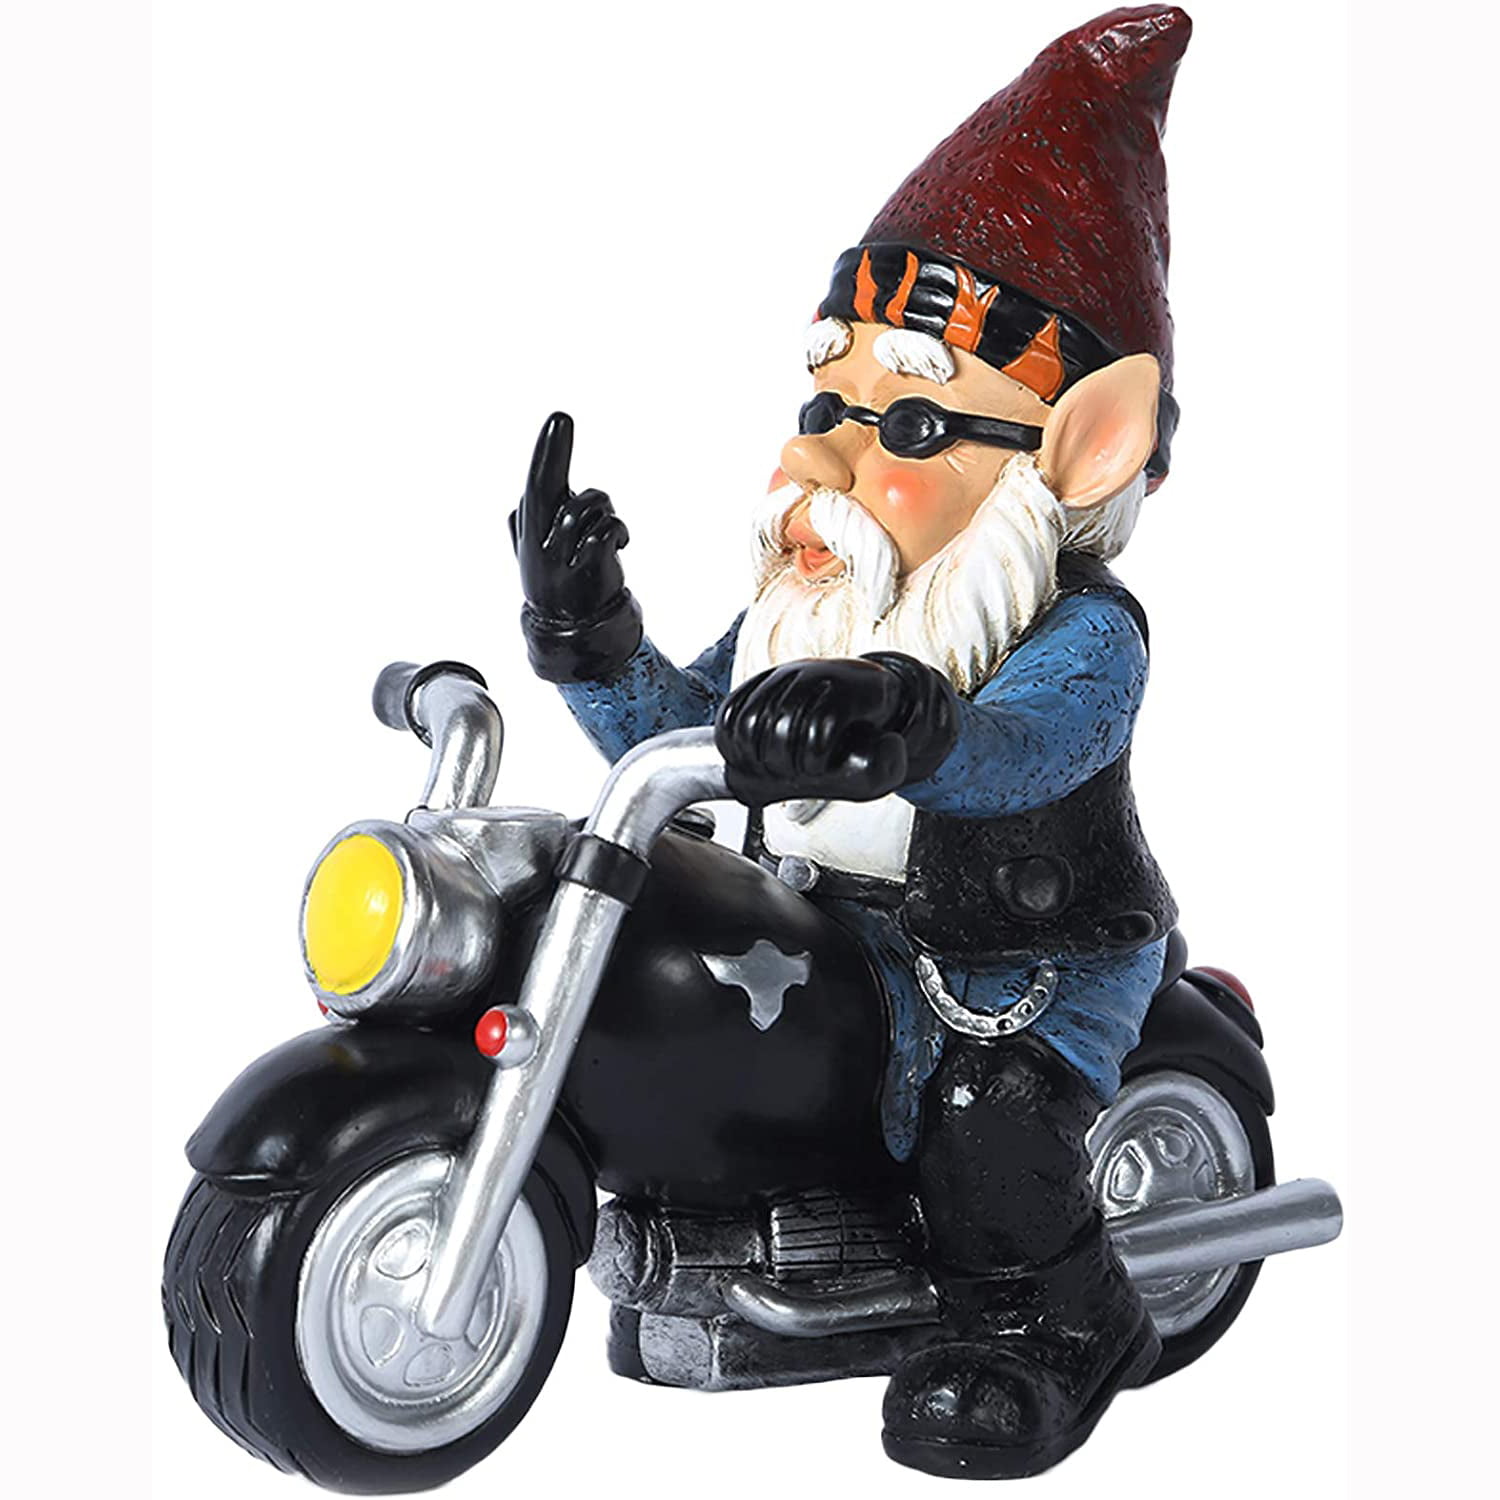 Naughty Gnome Riding Motorcycle Statue Funny Resin Crafts Home Garden Yard Decor 